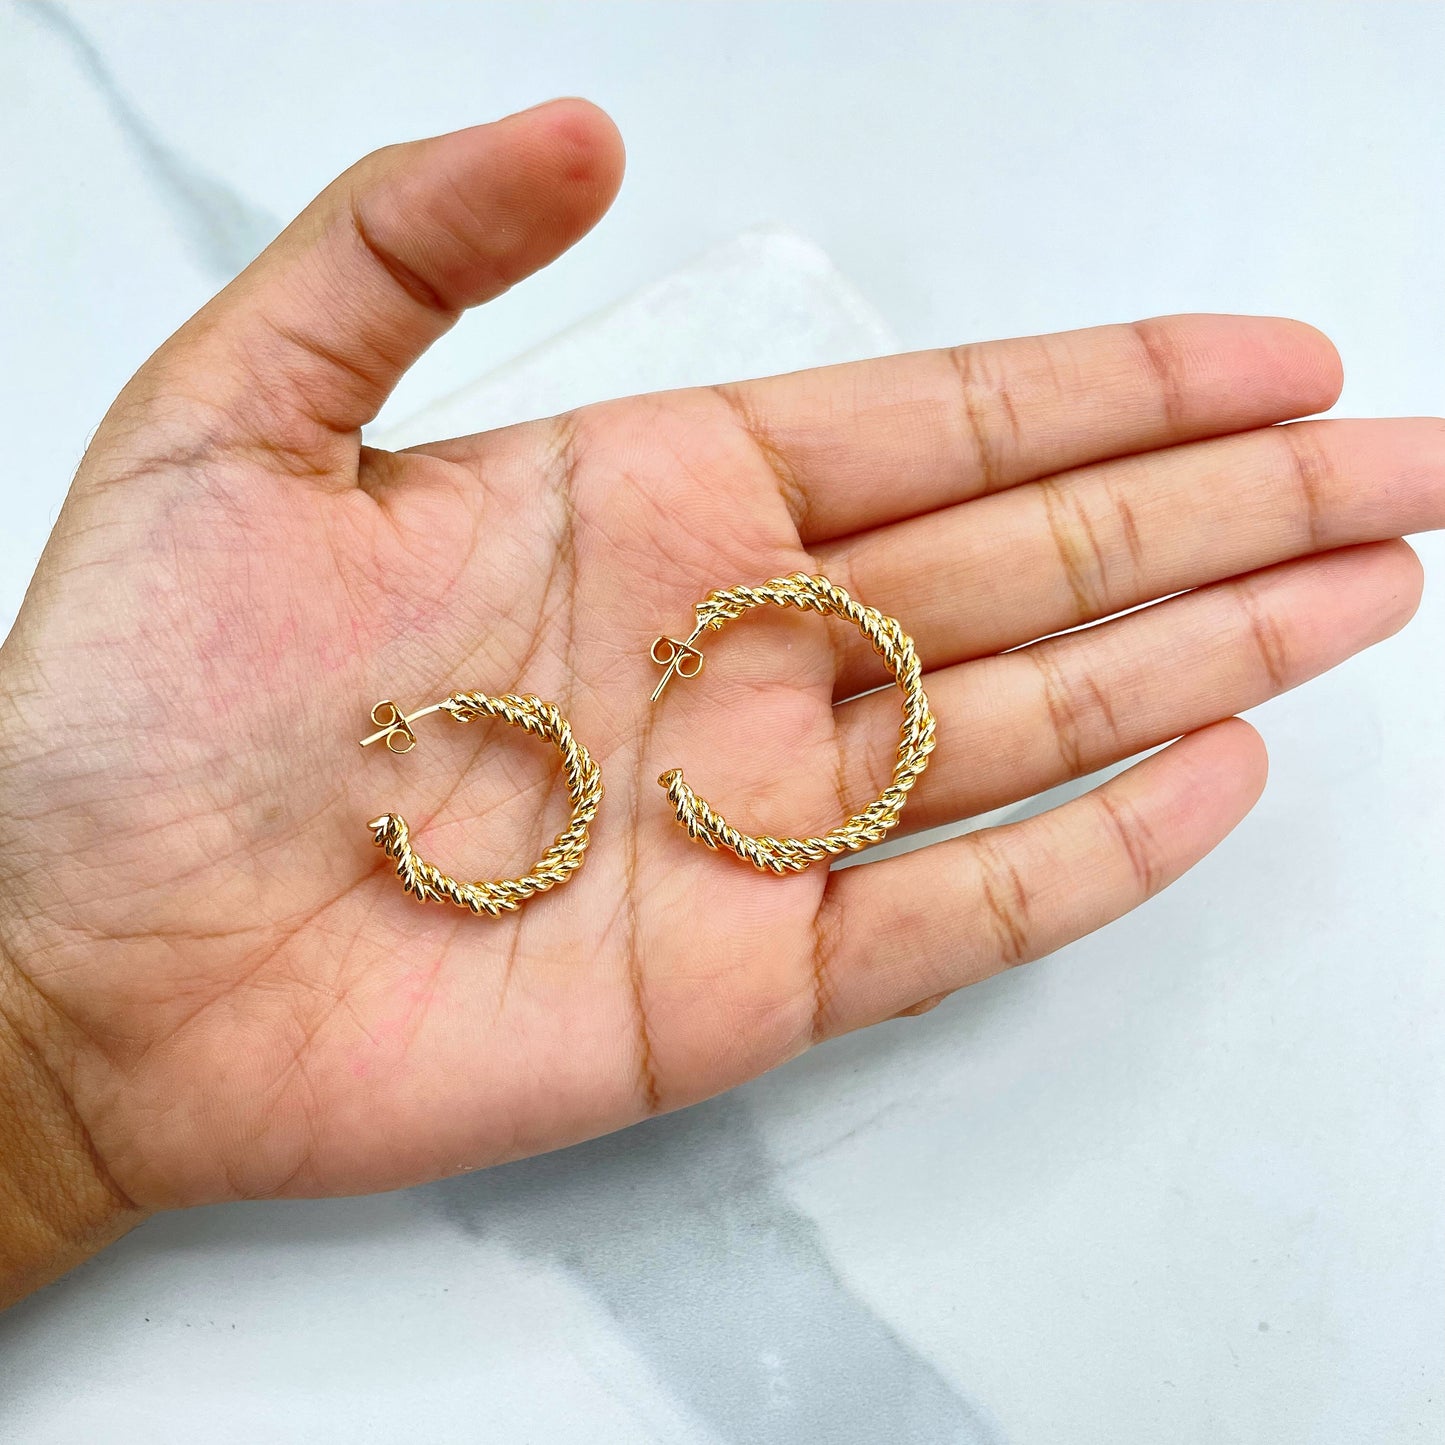 18k Gold Filled 31mm or 24mm Twisted Hoops Earrings, Classic & Minimalist Design, Wholesale Jewelry Making Supplies